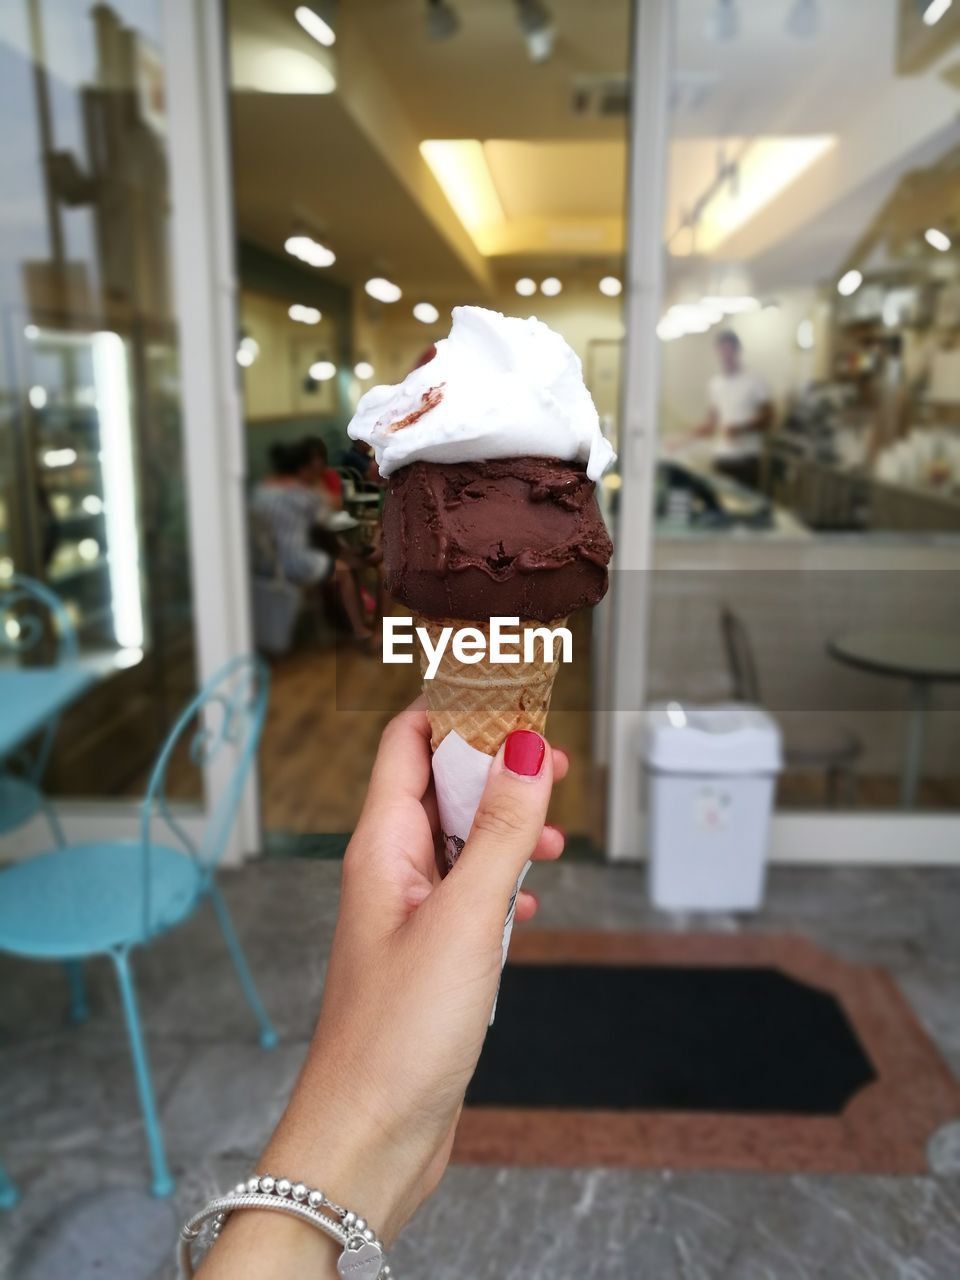 CROPPED HAND HOLDING ICE CREAM CONE AGAINST BLURRED BACKGROUND